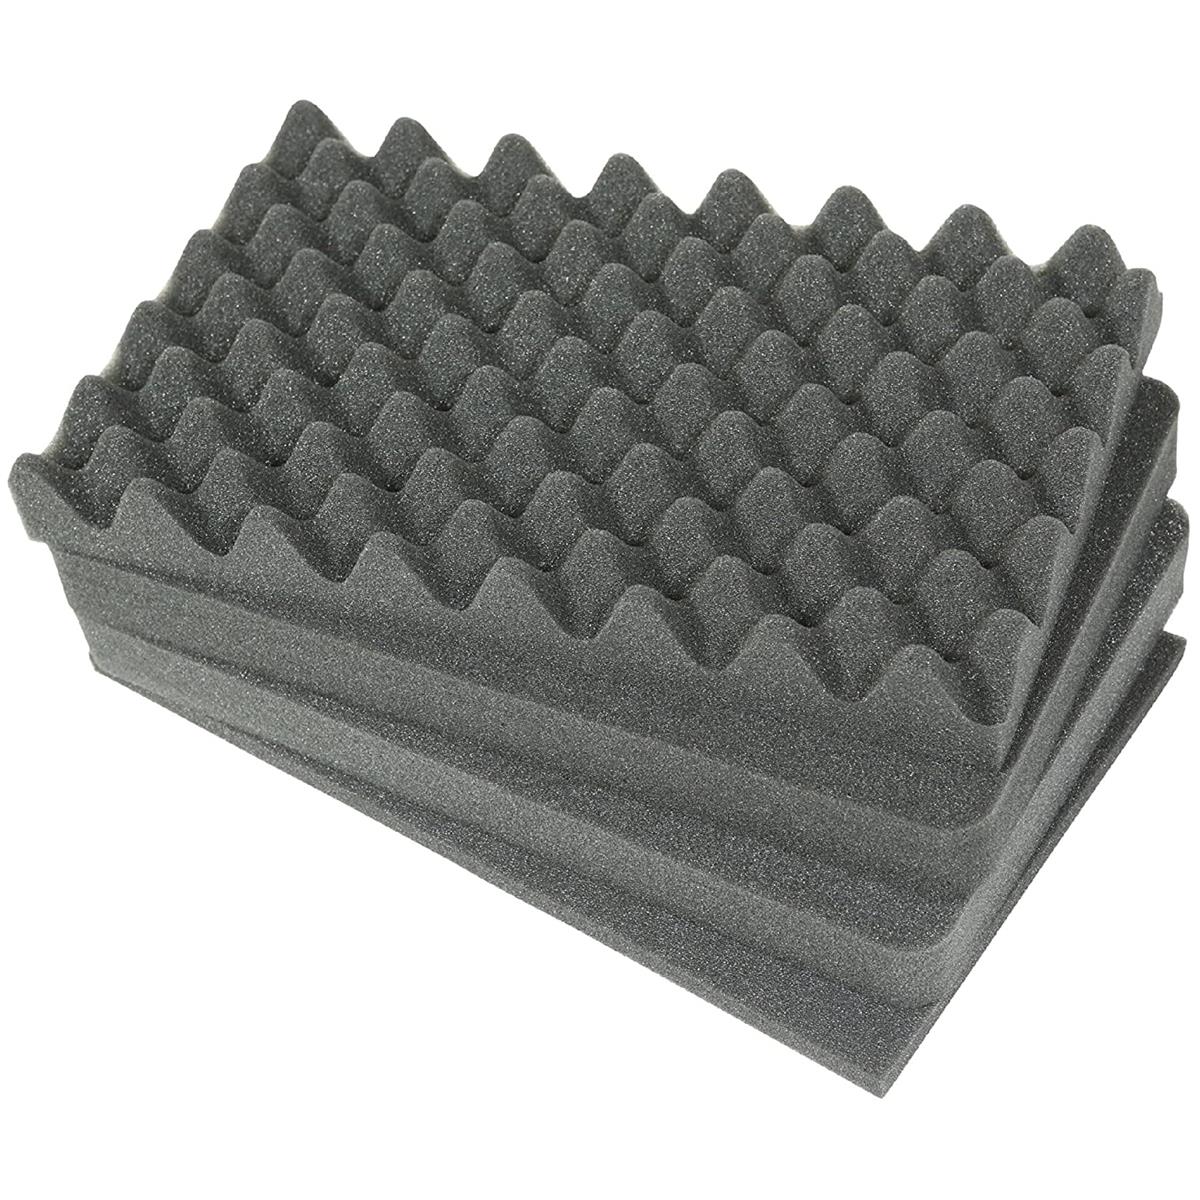 SKB Replacement Cubed Foam for 3i-1717-10